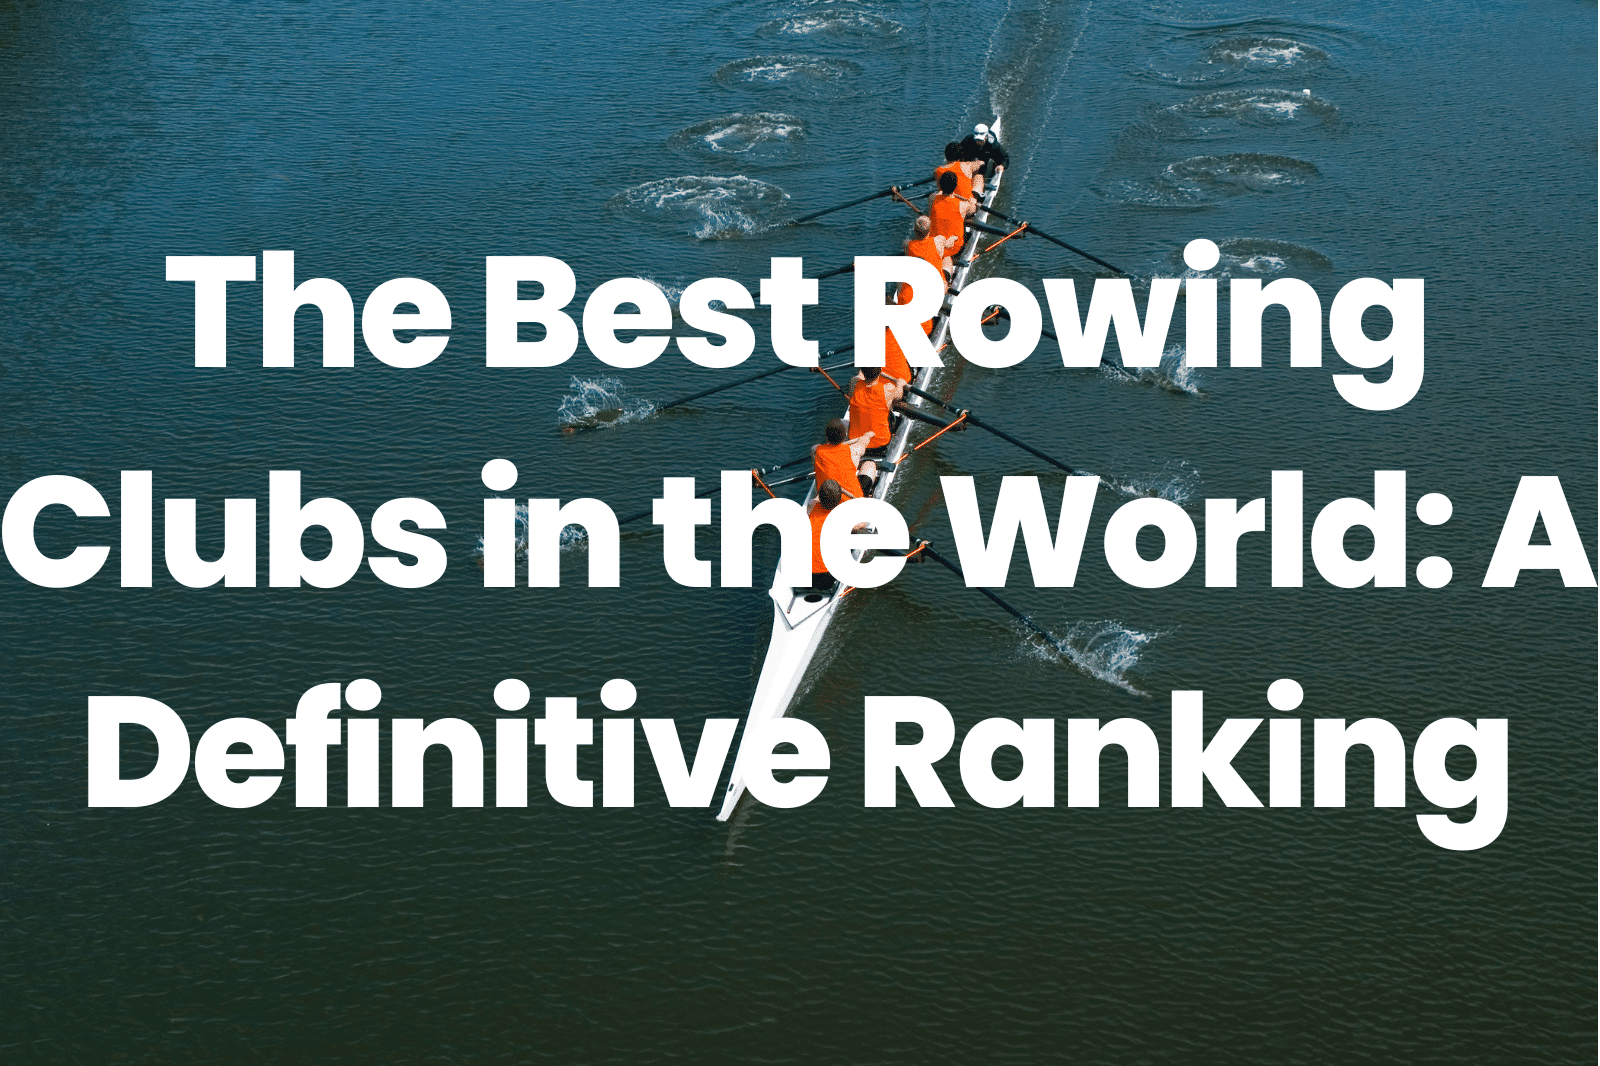 The Best Rowing Clubs in the World